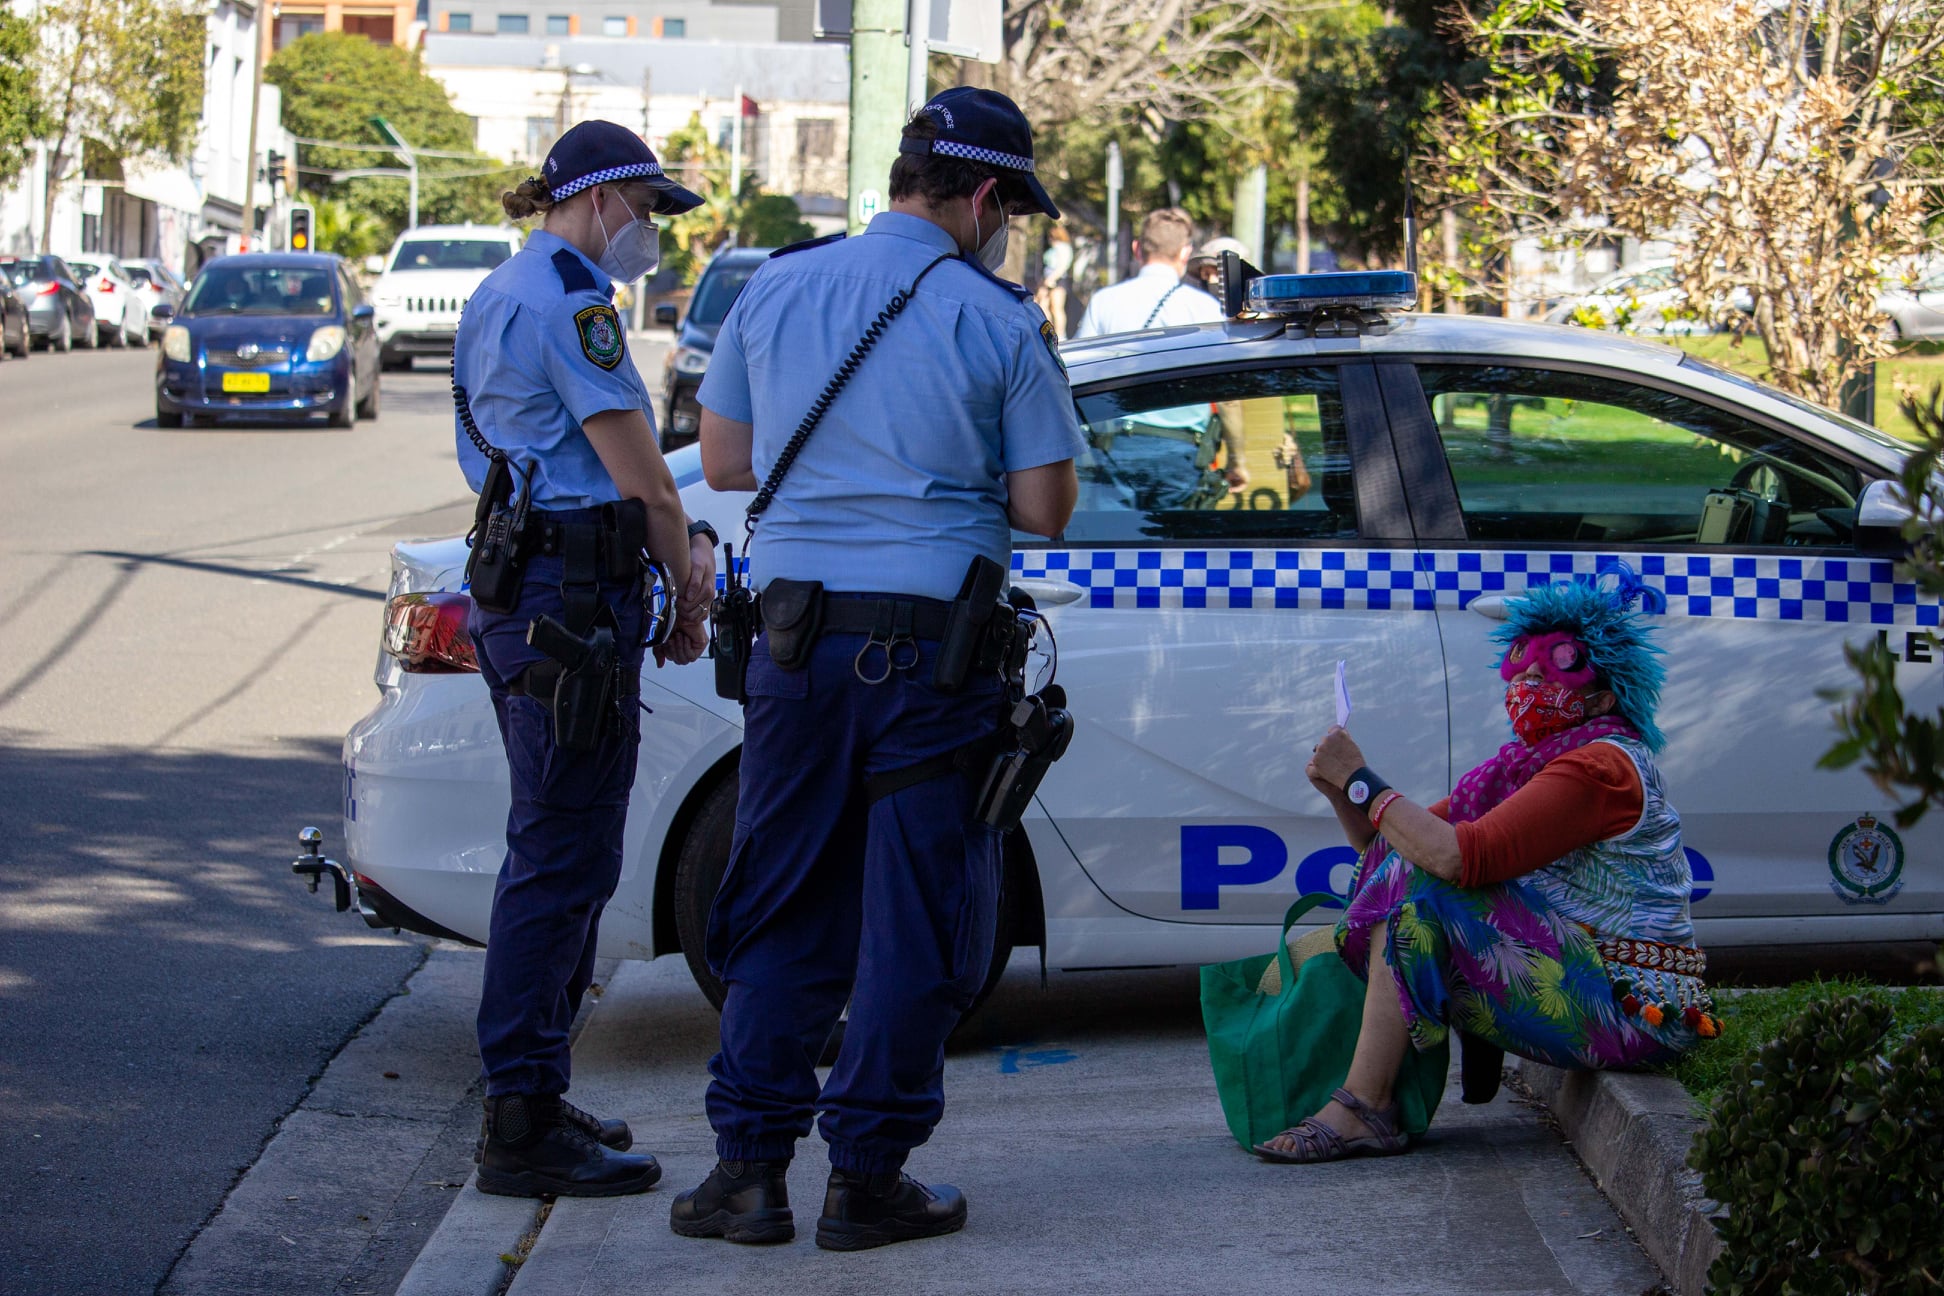 Camperdown Social Housing residents protest over-policing and rent control while under hard COVID-19 lockdown